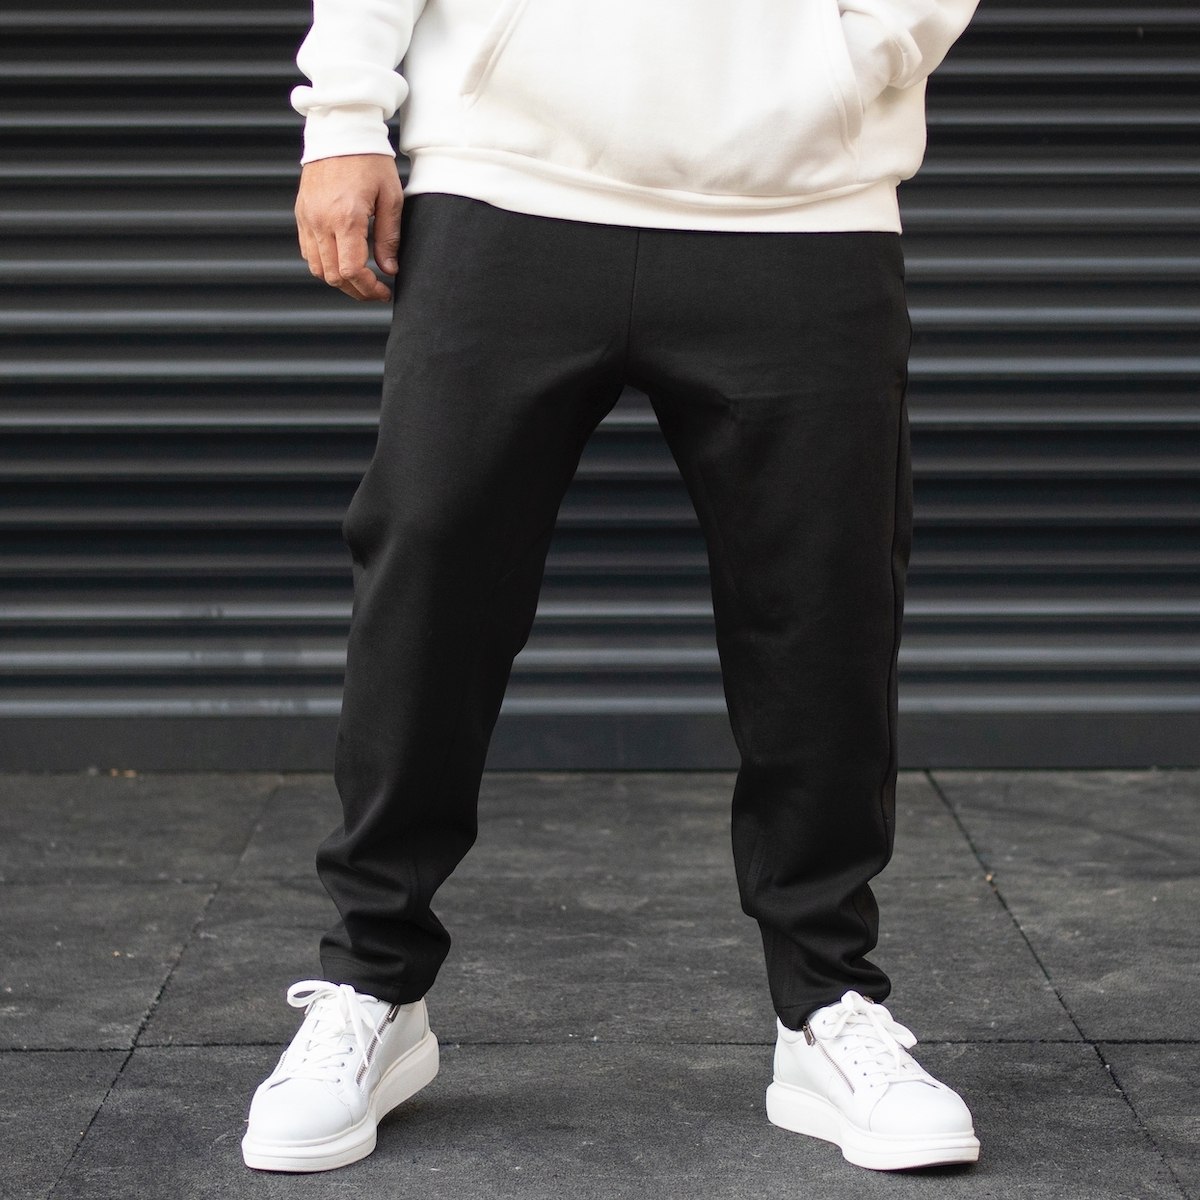 Men's Oversize Loose Basic Sweatpants With Thick Texture In Black